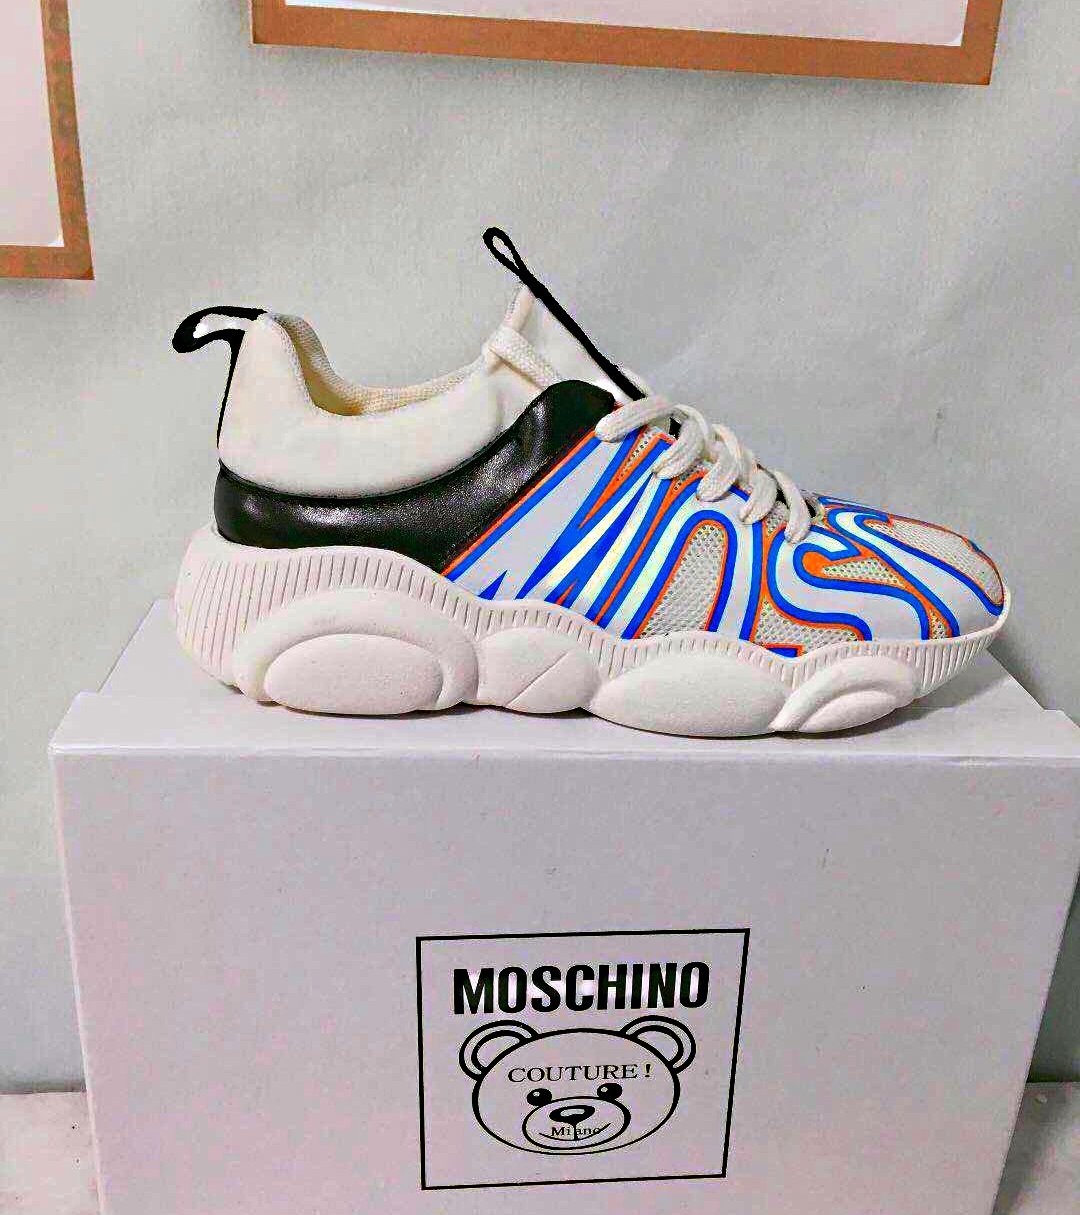 MOSKINO  Sneakers 2 Colors W